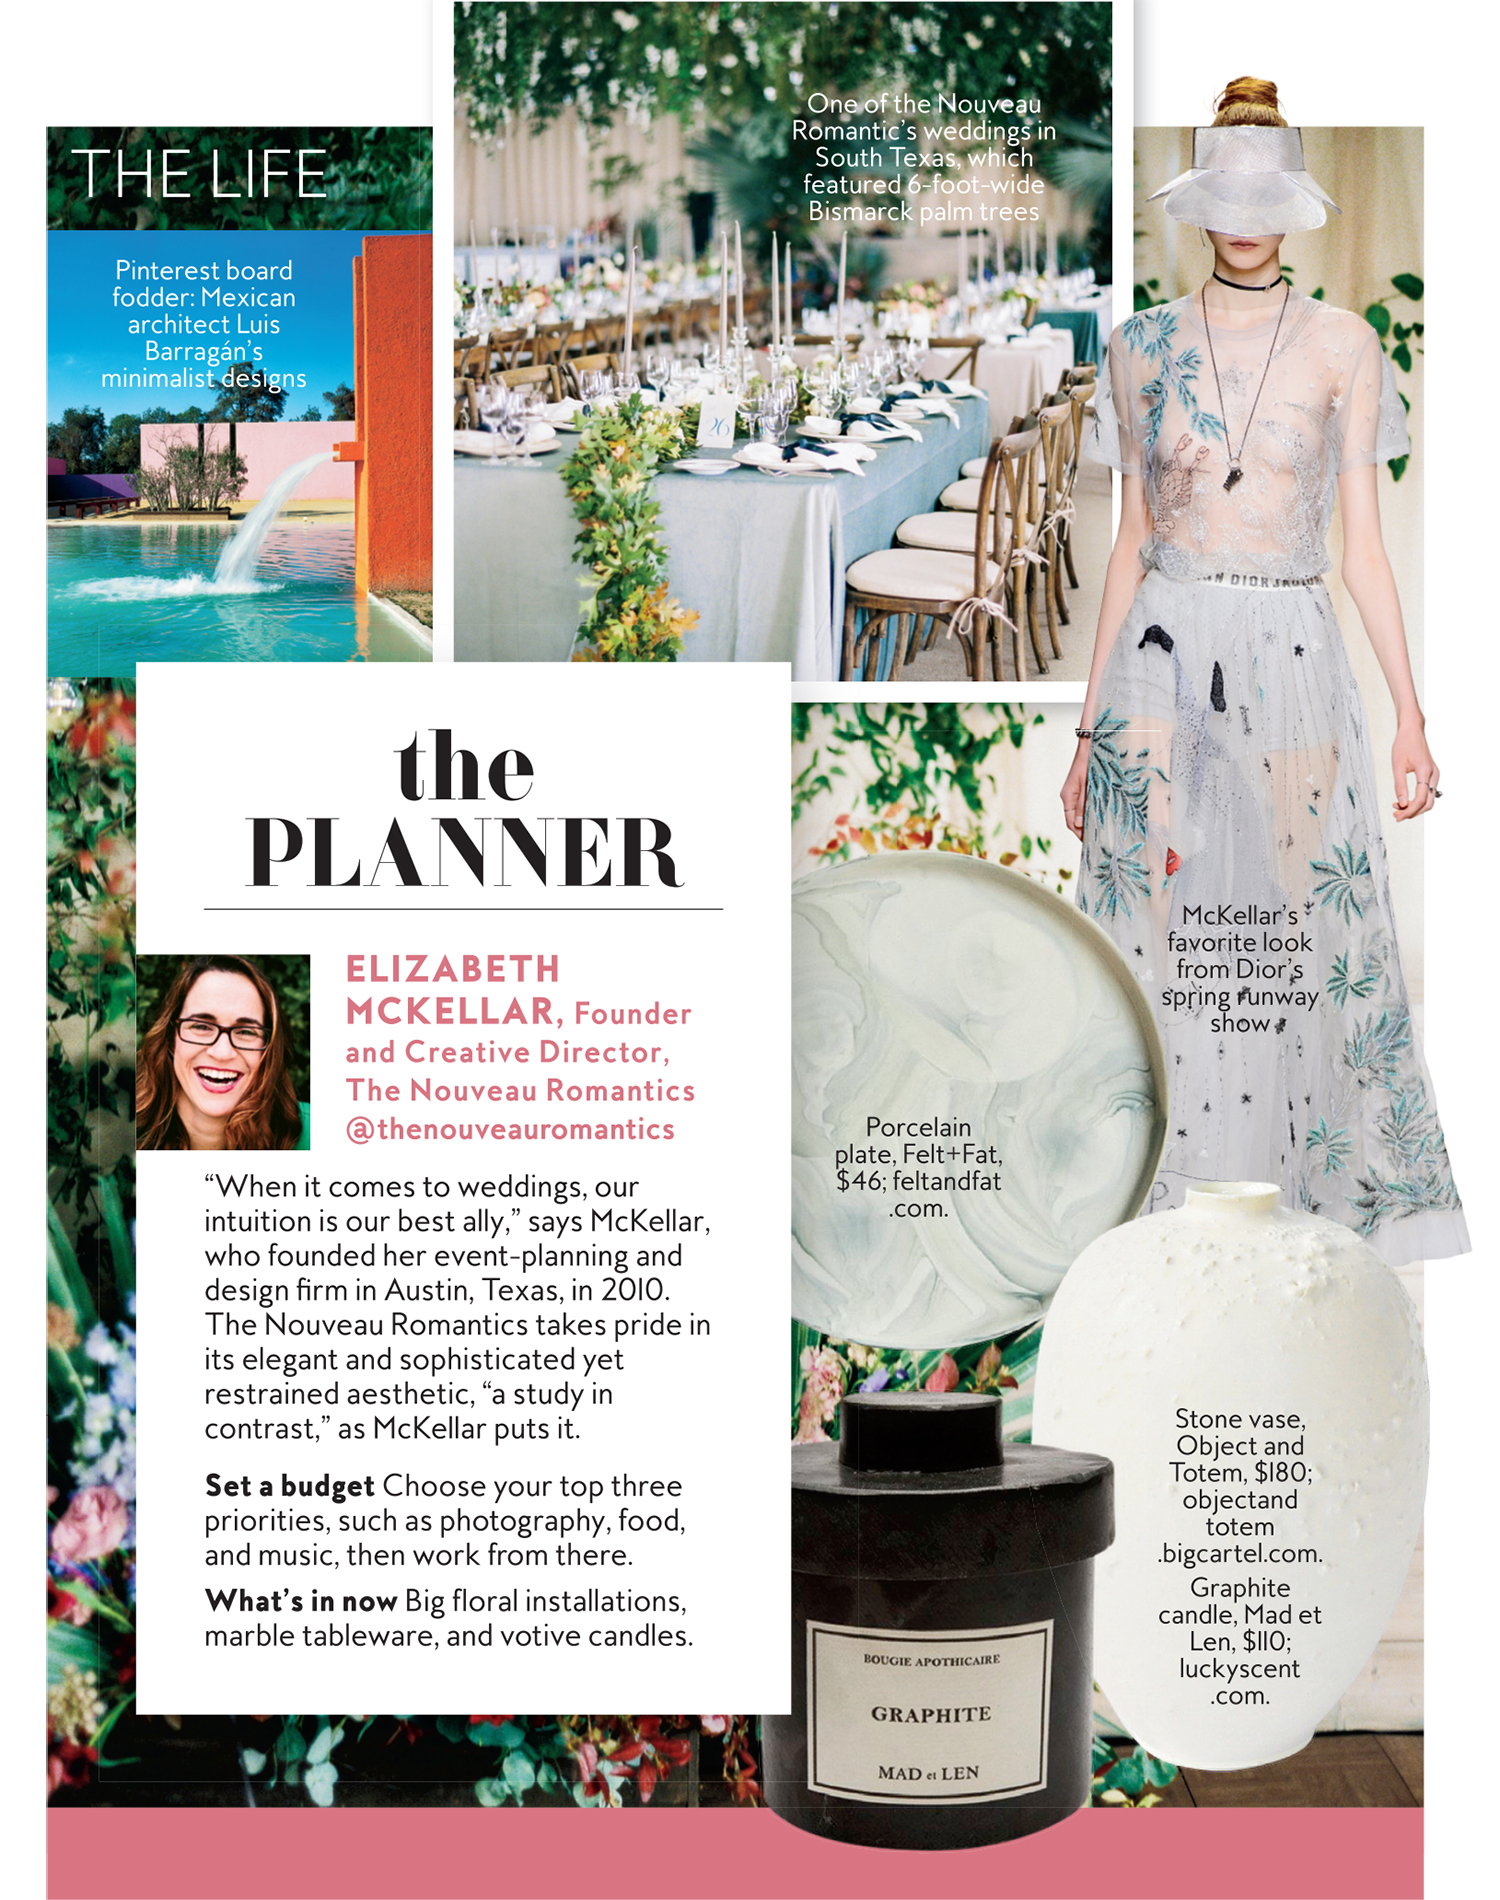 Instyle Magazine // Top 11 Wedding Planning Questions from The Nouveau Romantics